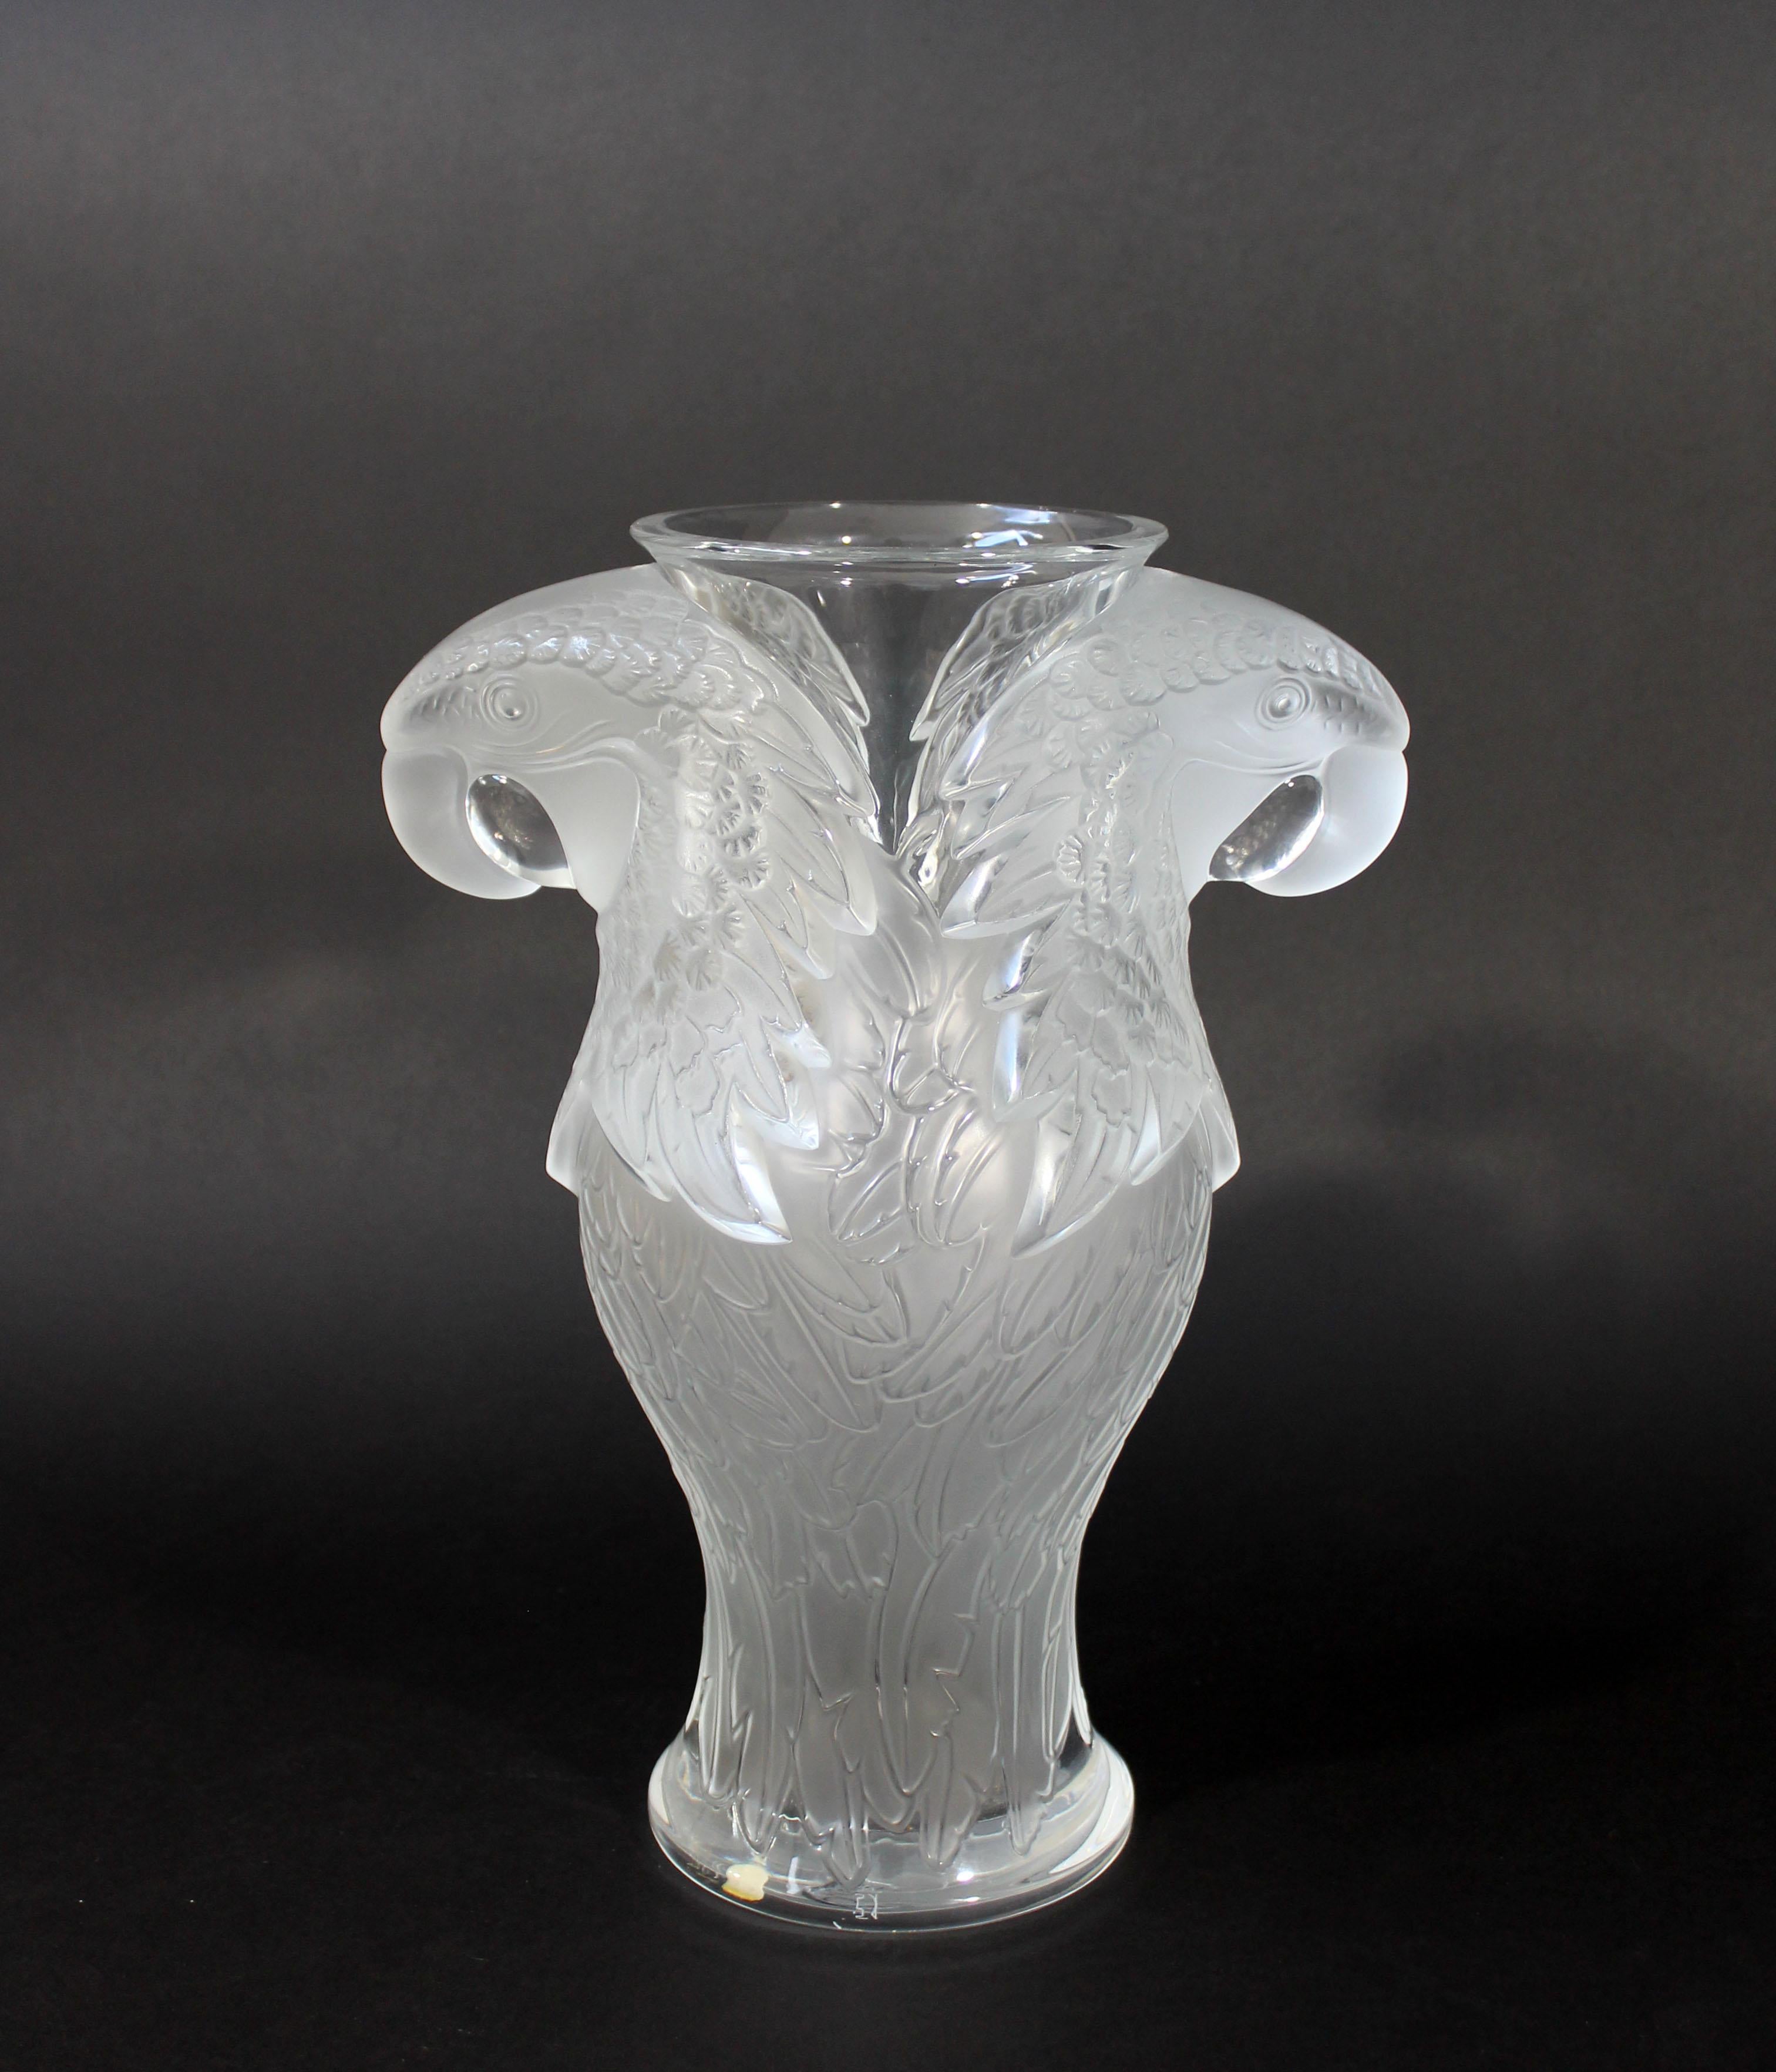 Contemporary Lalique France Crystal Glass Macao Macaw Vase Table Sculpture 1